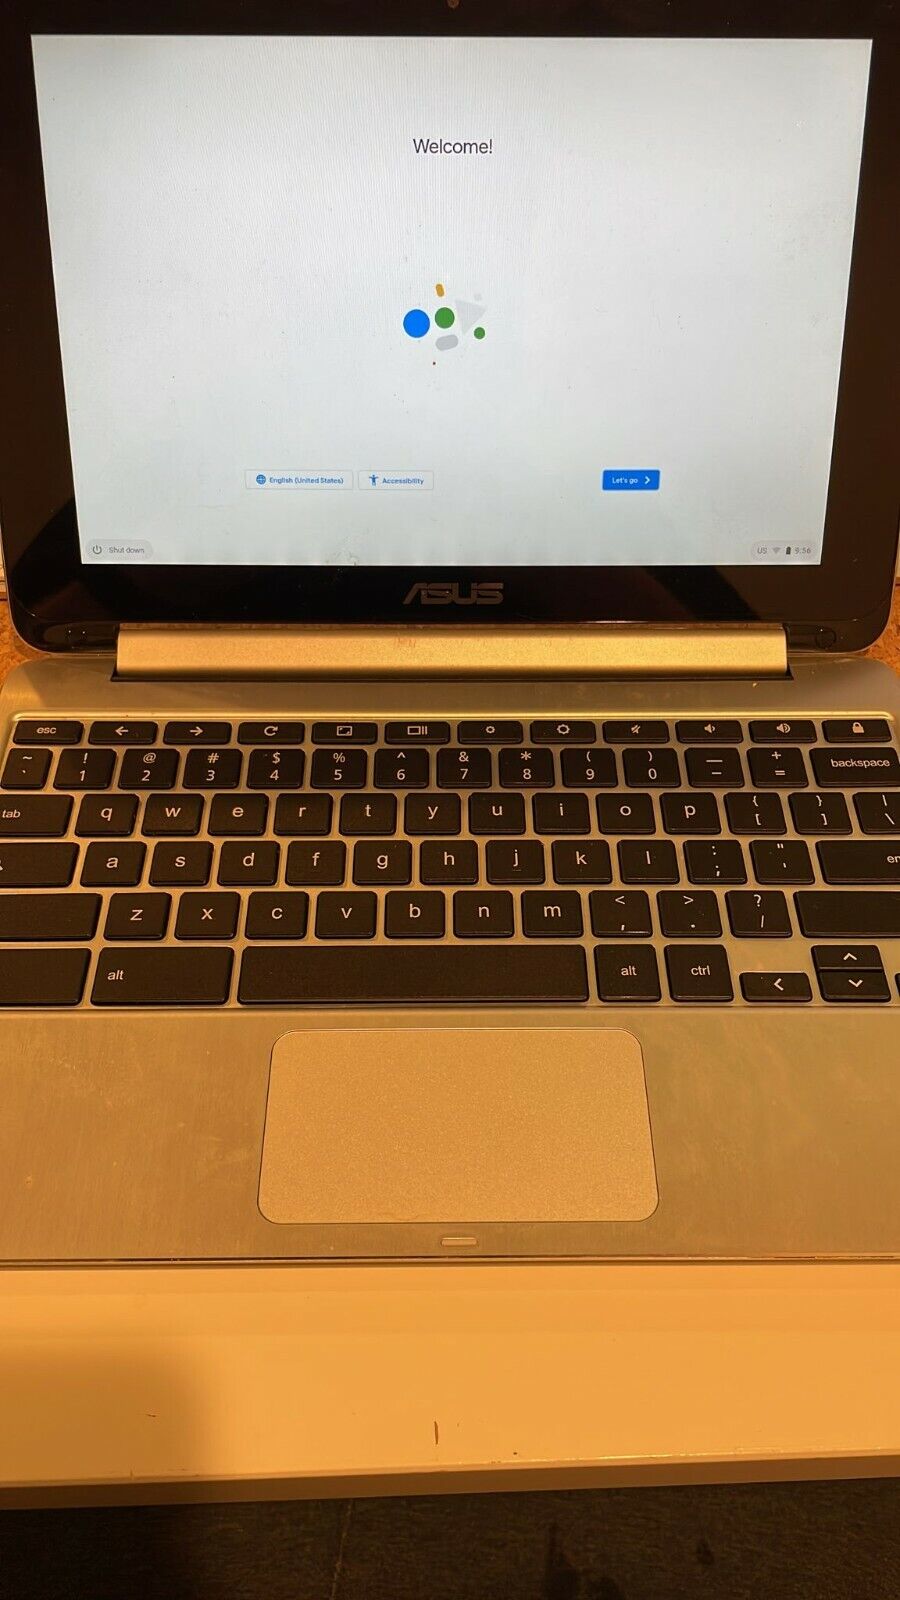 ASUS C100PA-DB02 10.1-inch Touch Chromebook Flip 4GB 16GB Good Screen PARTS ONLY